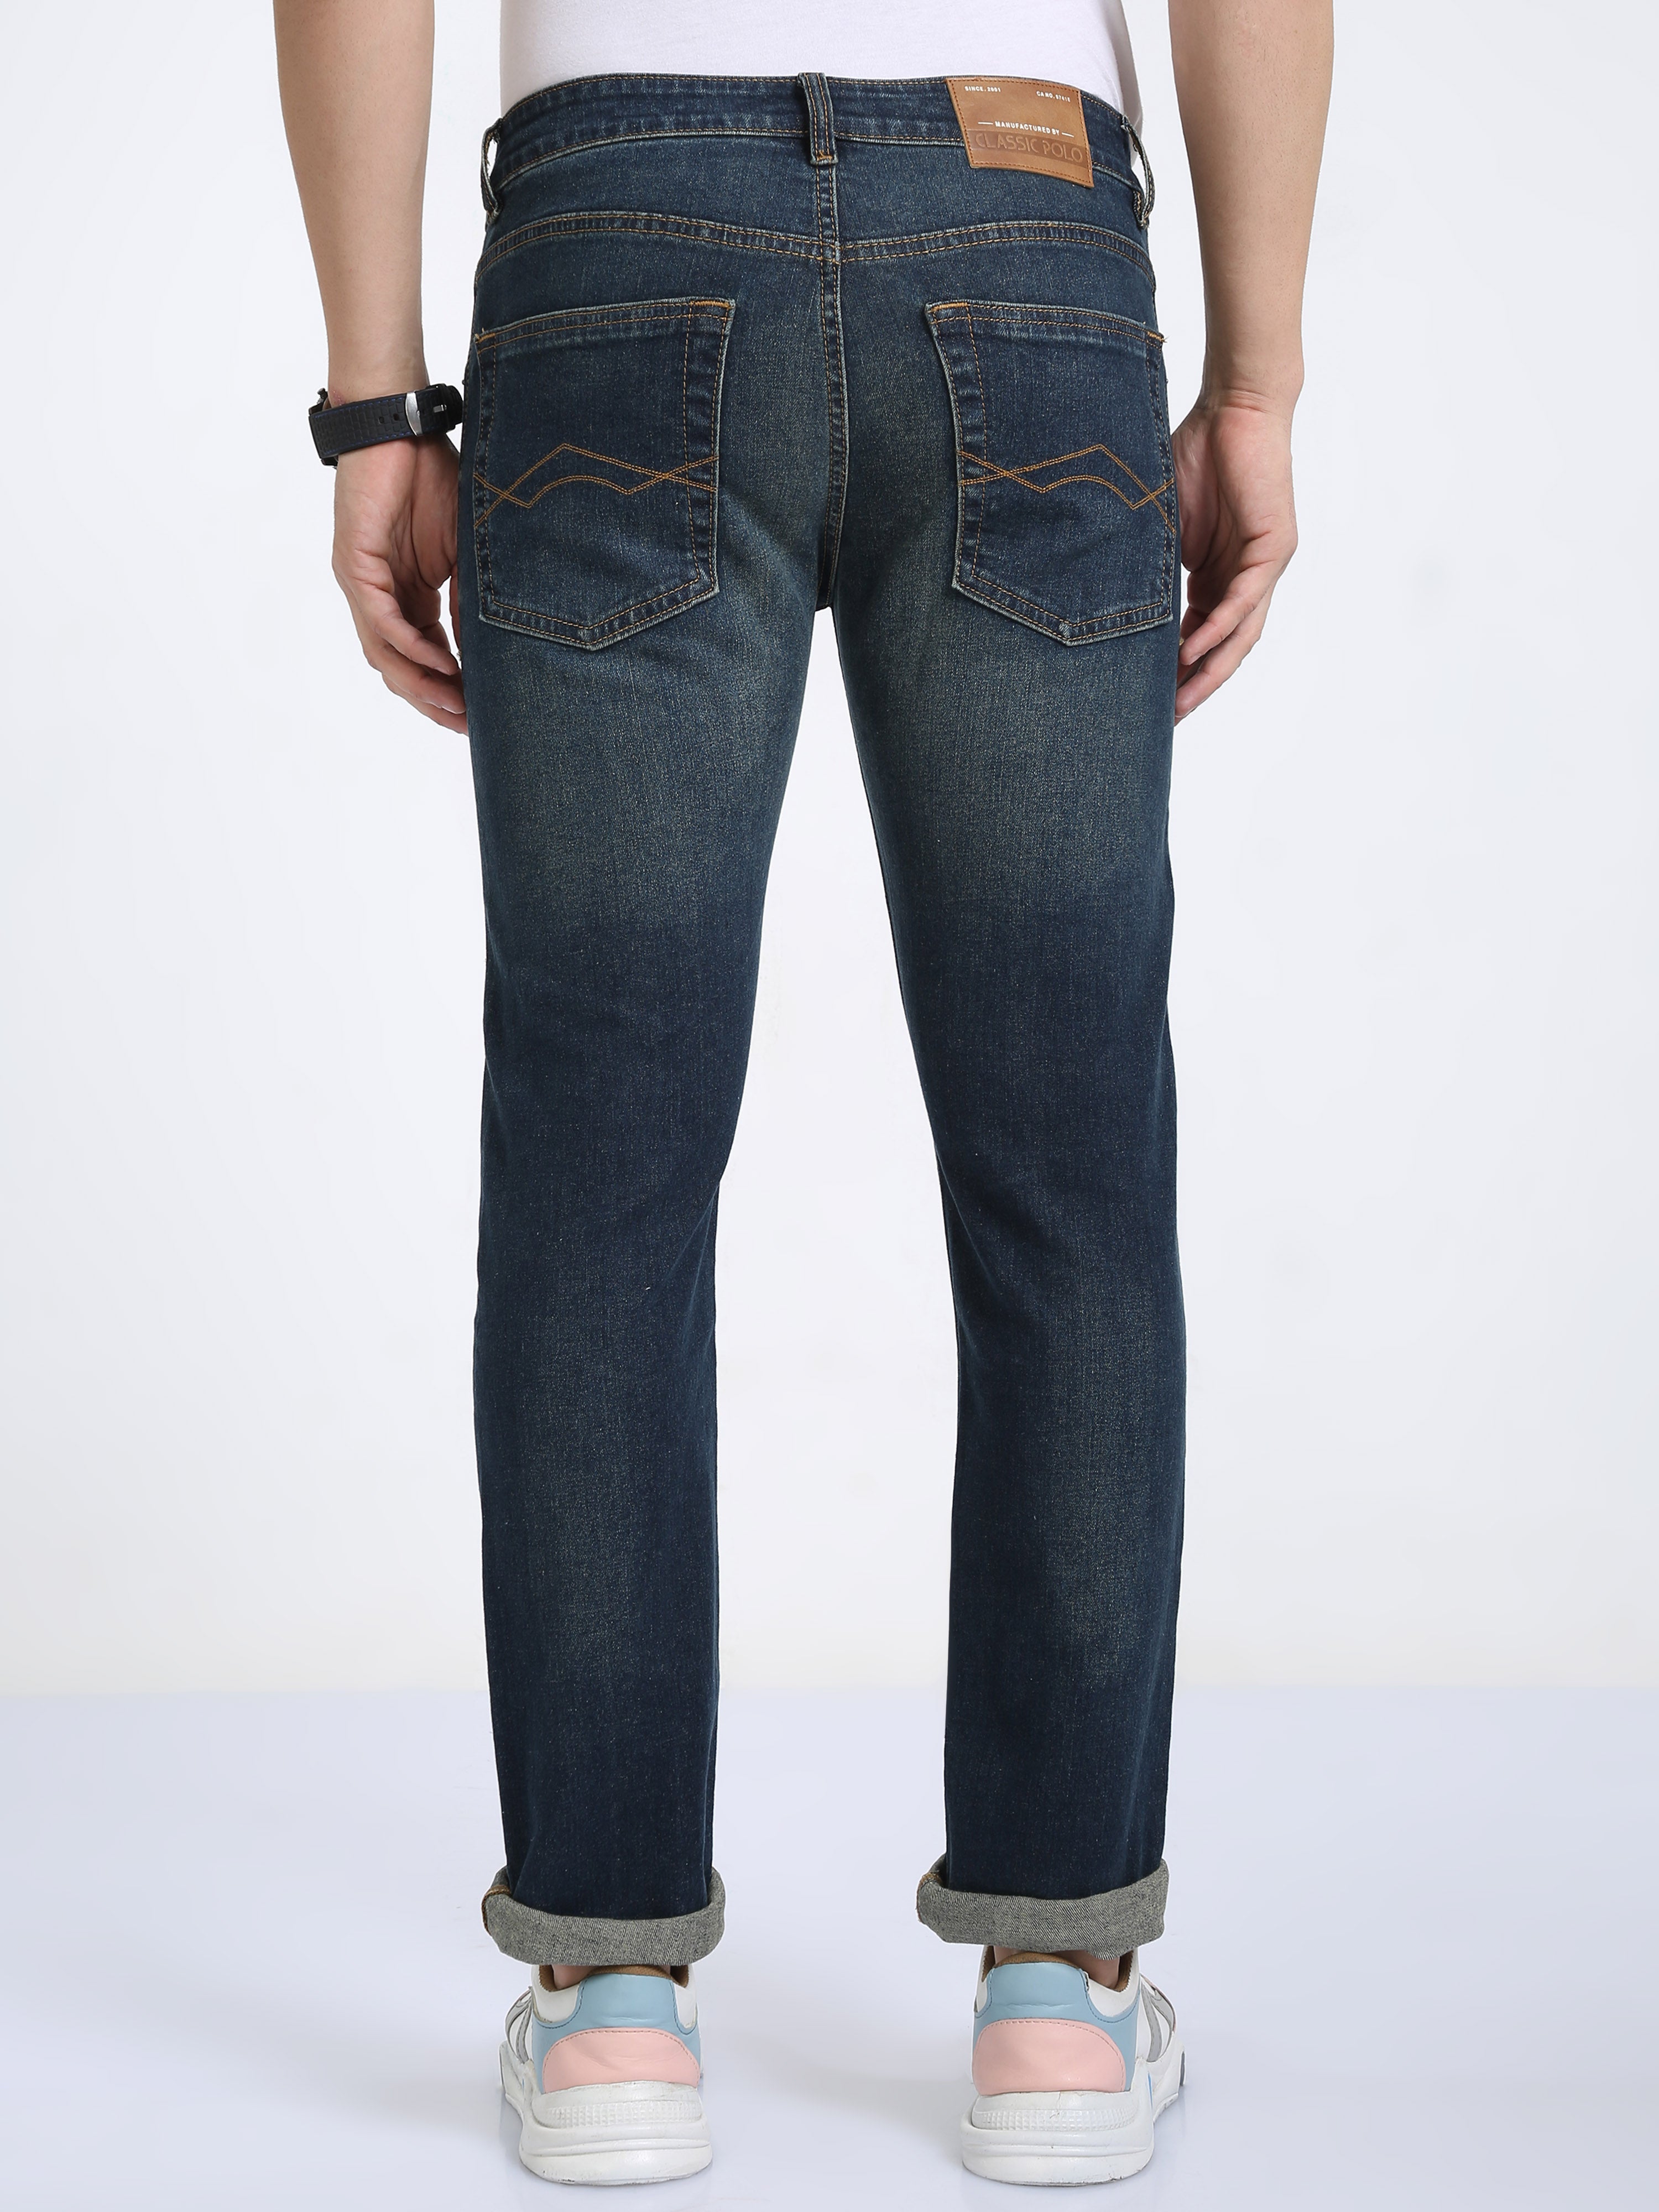 Classic Polo Men's Slim Fit Cotton Denim | CPDO2-15 DNVY-SF-LY